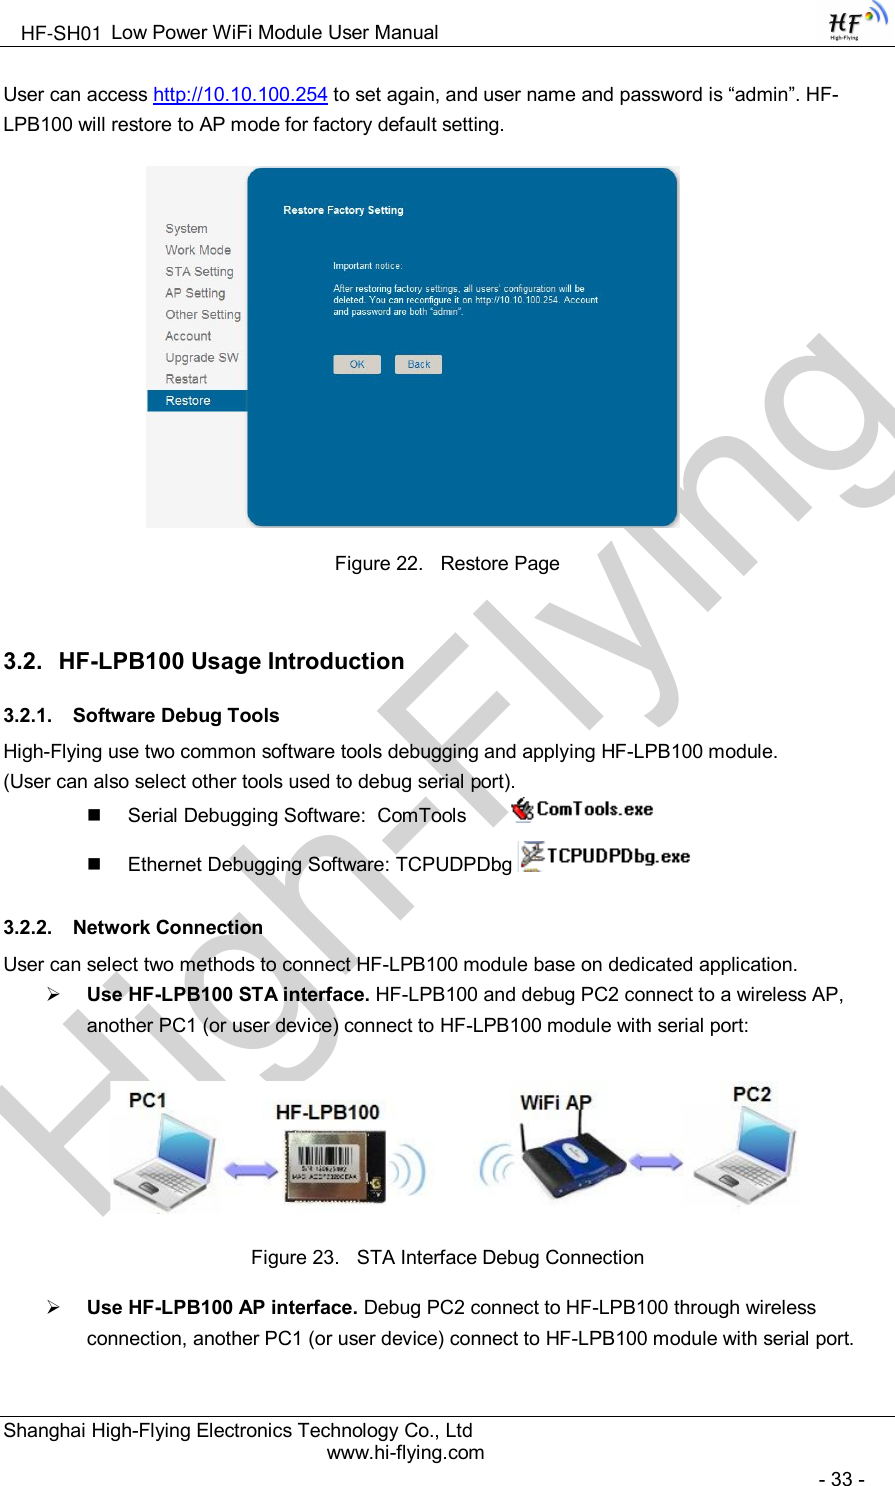 High-FlyingLow Power WiFi Module User ManualShanghai High-Flying Electronics Technology Co., Ltdwww.hi-flying.com- 33 -User can access http://10.10.100.254 to set again, and user name and password is “admin”. HF-LPB100 will restore to AP mode for factory default setting.Figure 22. Restore Page3.2. HF-LPB100 Usage Introduction3.2.1. Software Debug ToolsHigh-Flying use two common software tools debugging and applying HF-LPB100 module.(User can also select other tools used to debug serial port).Serial Debugging Software: ComToolsEthernet Debugging Software: TCPUDPDbg3.2.2. Network ConnectionUser can select two methods to connect HF-LPB100 module base on dedicated application.Use HF-LPB100 STA interface. HF-LPB100 and debug PC2 connect to a wireless AP,another PC1 (or user device) connect to HF-LPB100 module with serial port:Figure 23. STA Interface Debug ConnectionUse HF-LPB100 AP interface. Debug PC2 connect to HF-LPB100 through wirelessconnection, another PC1 (or user device) connect to HF-LPB100 module with serial port.HF-SH01